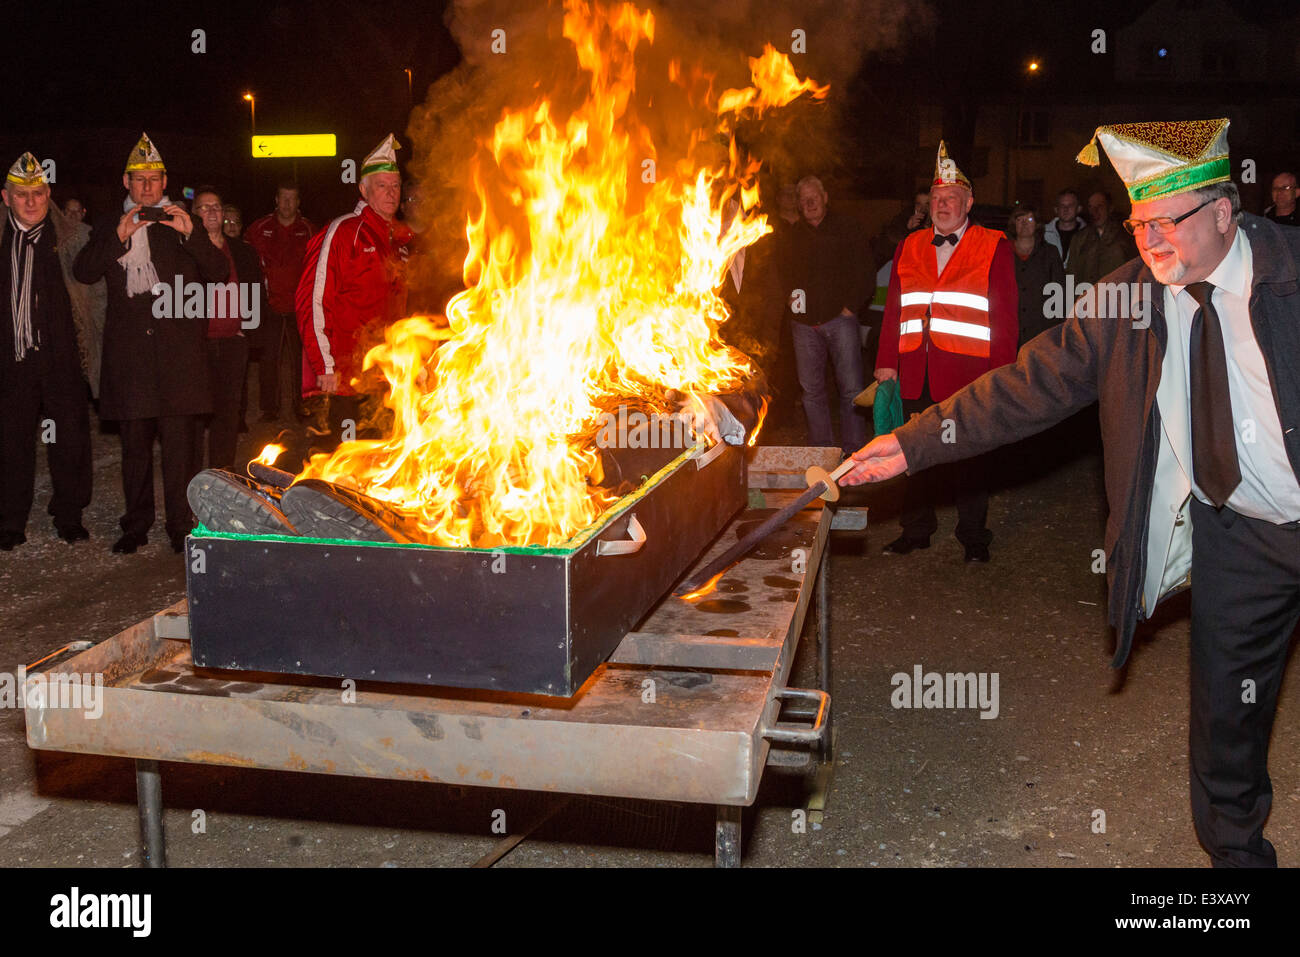 German carnival revelers in good mood burn the deceased Bacchus dummy at his cremation burial at the end of the carnival season Stock Photo